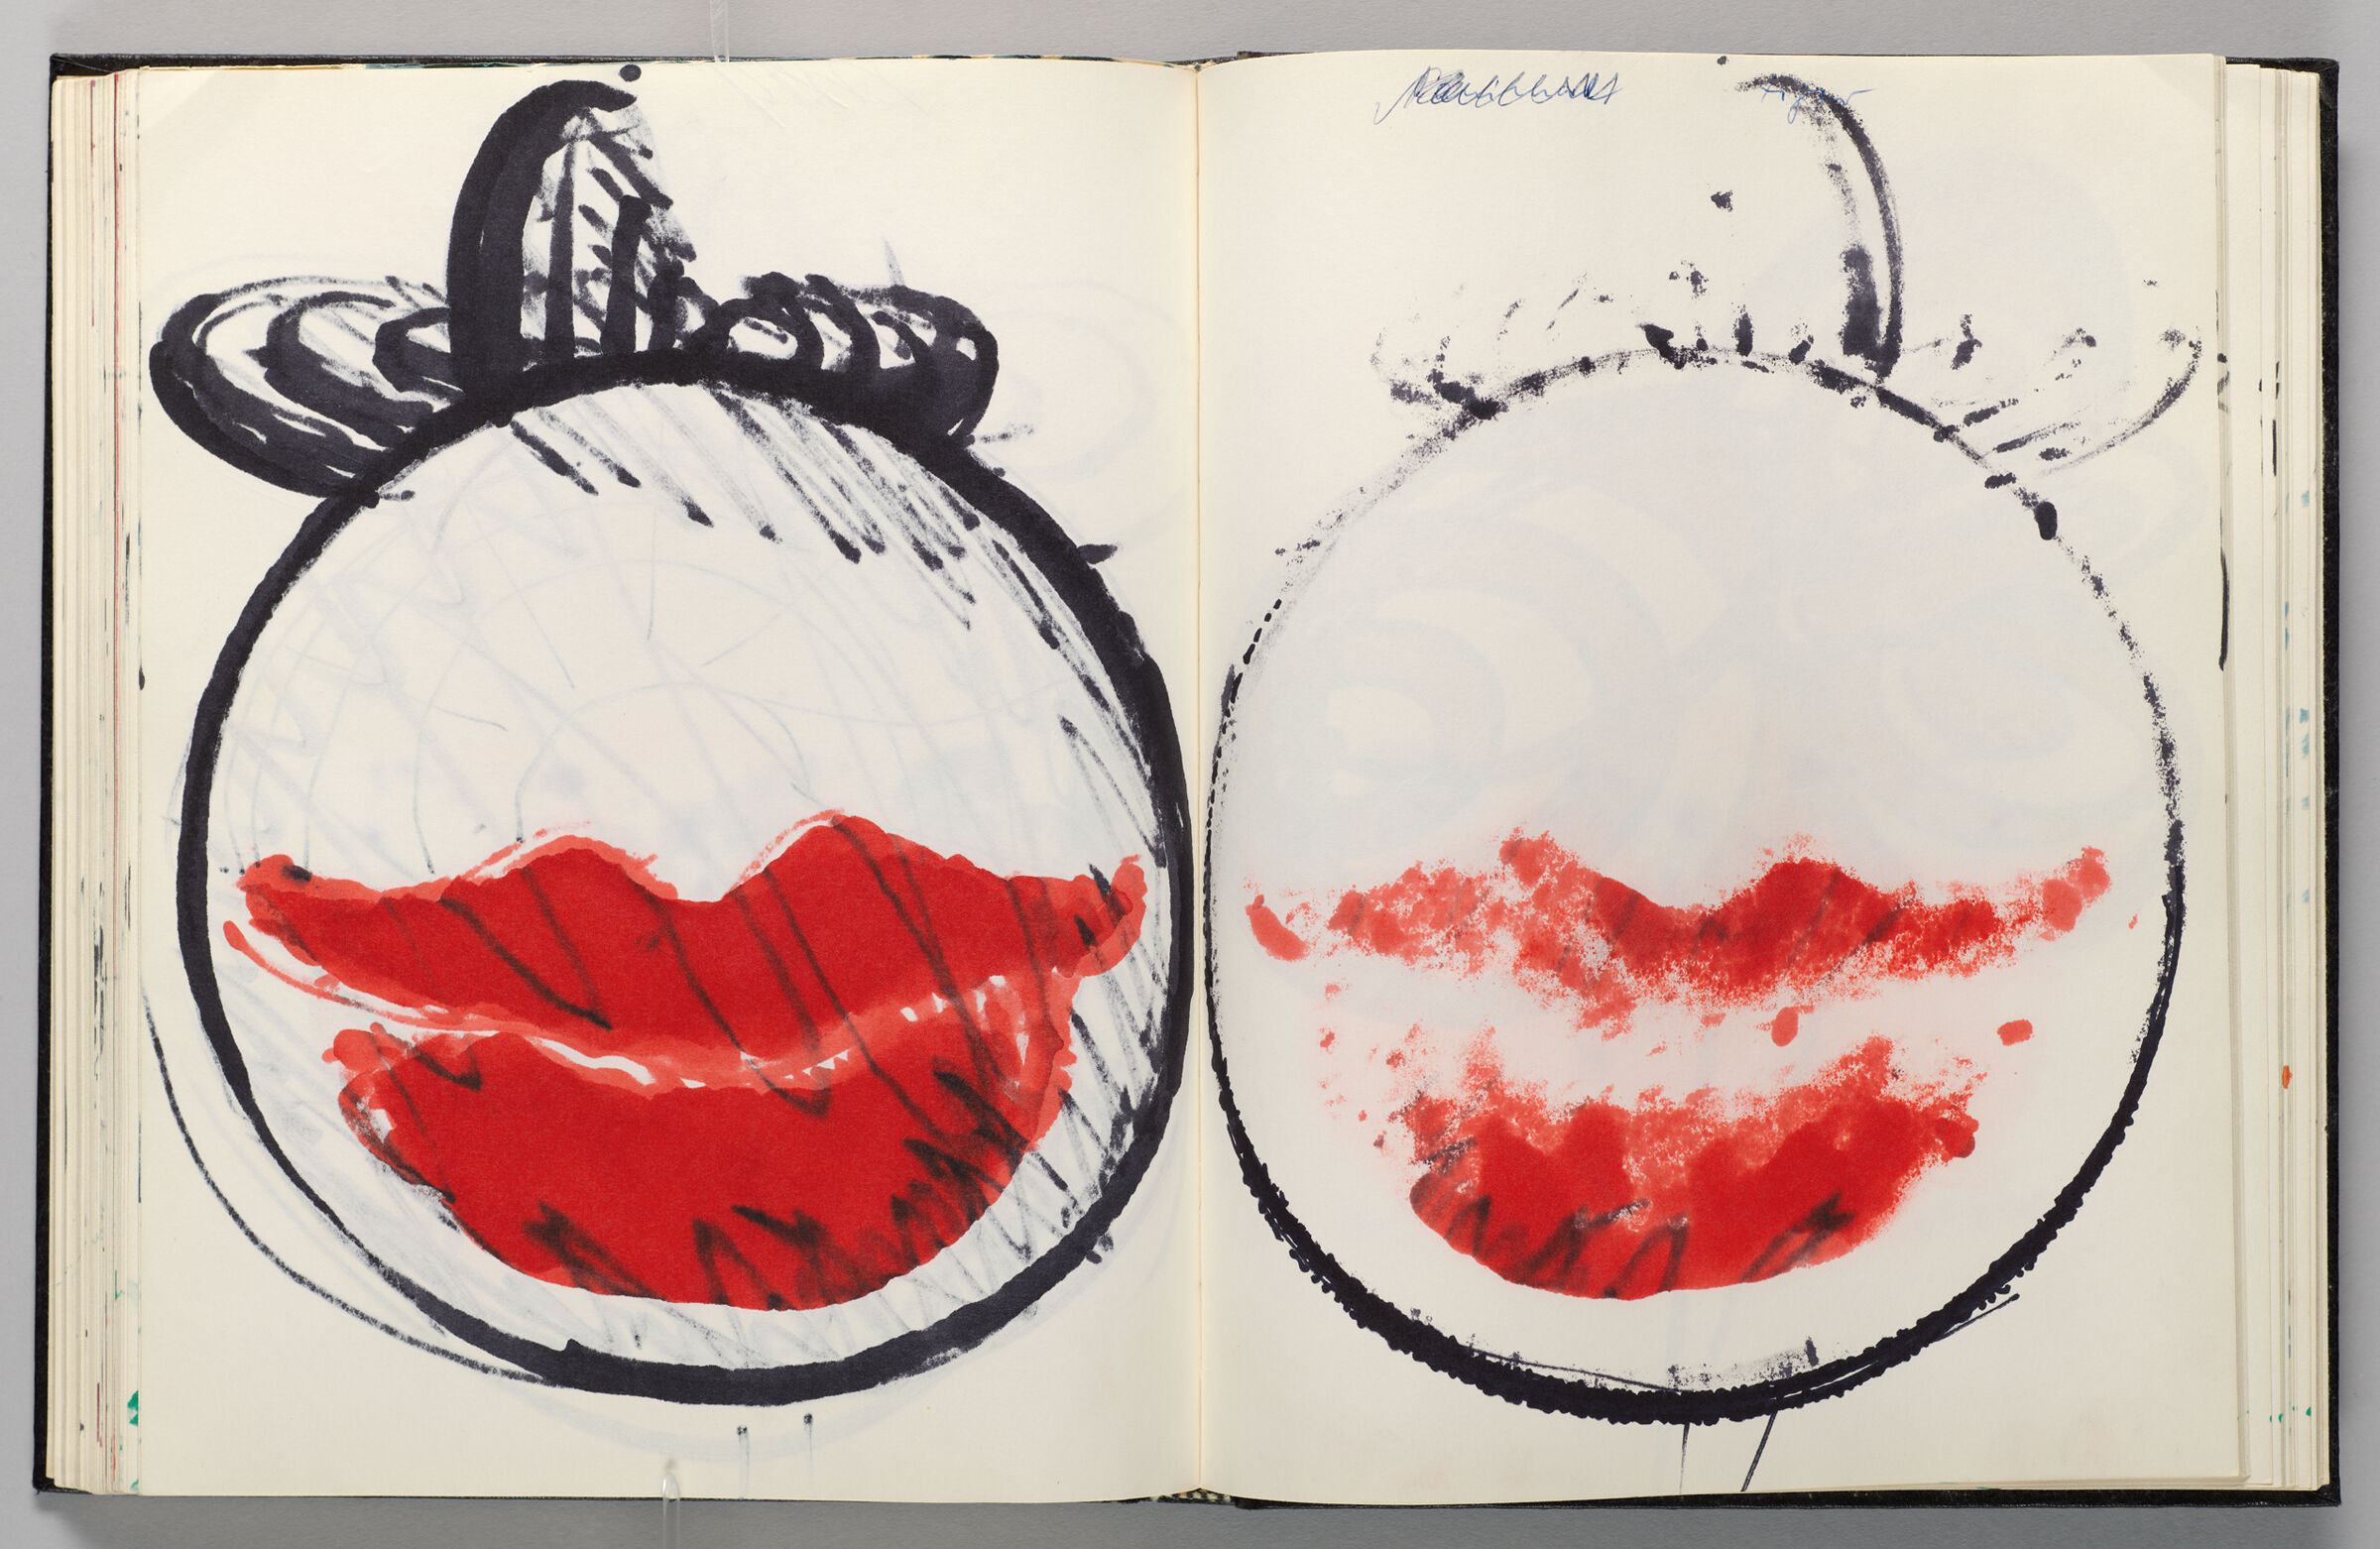 Untitled (Bleed-Through Of Previous Page, Left Page); Untitled (Barrage Balloon Design, Right Page)